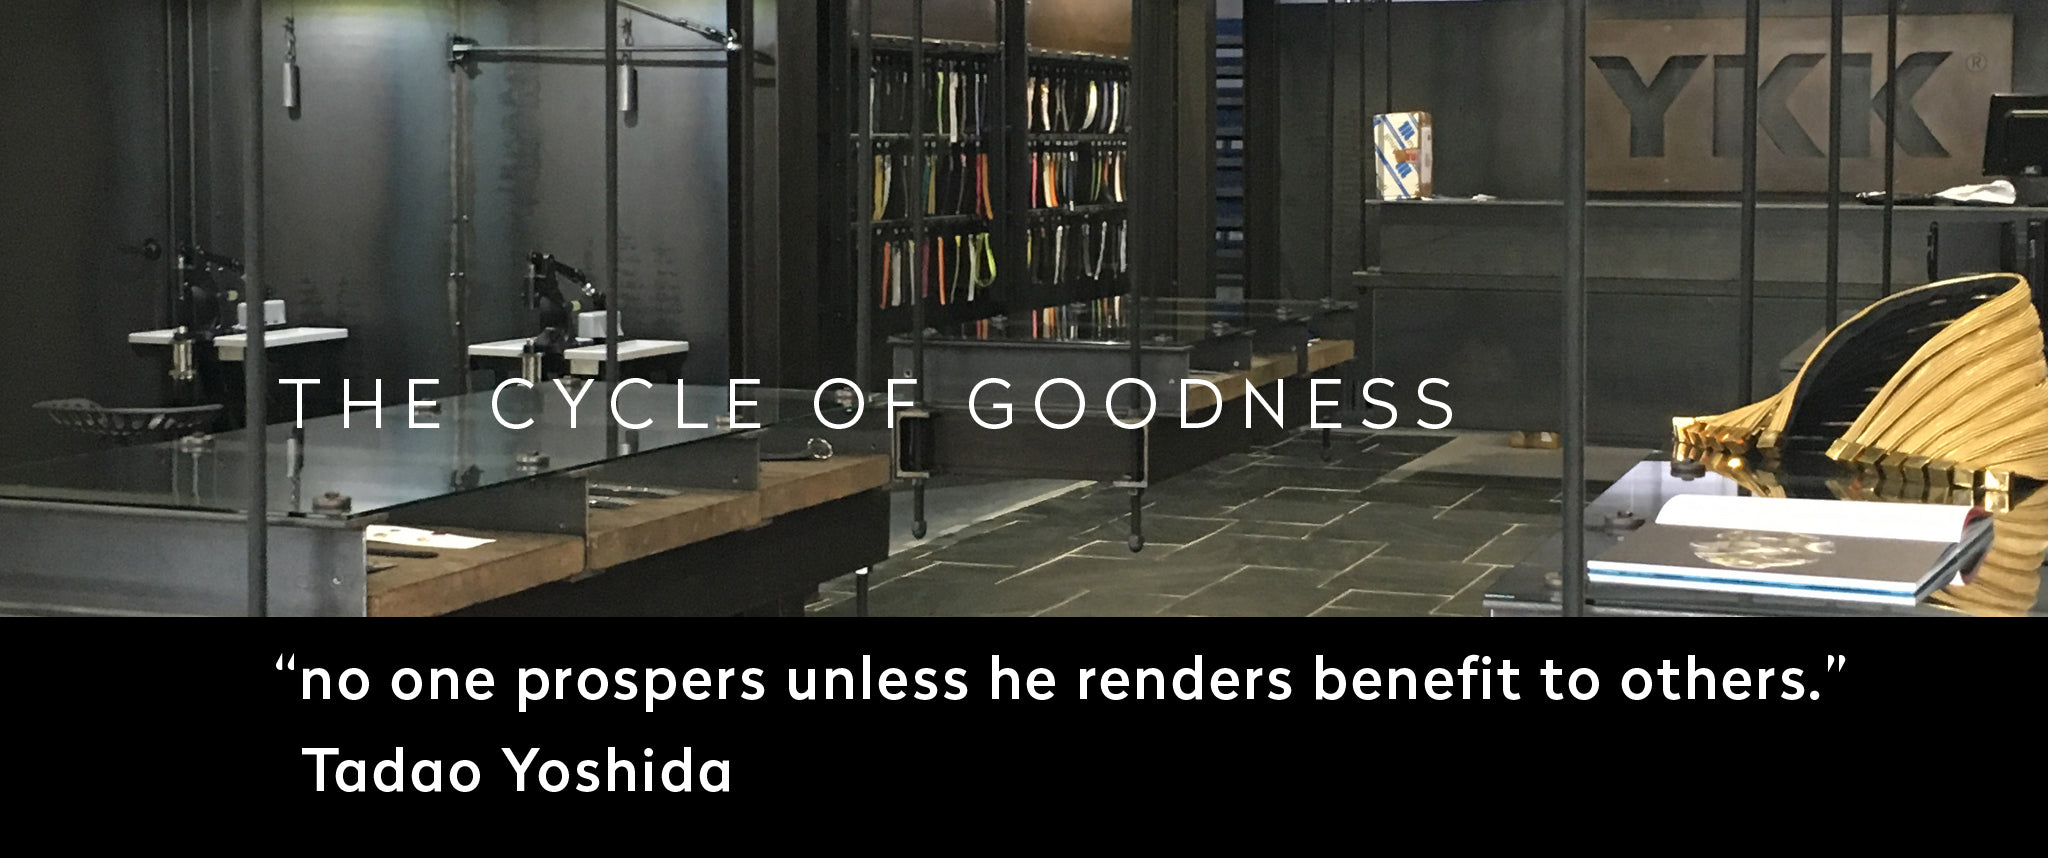 YKK zippers - Tadao Yoshida, founder's principle - Cycle of Goodness - 'no one prospers unless he renders benefit to others.'